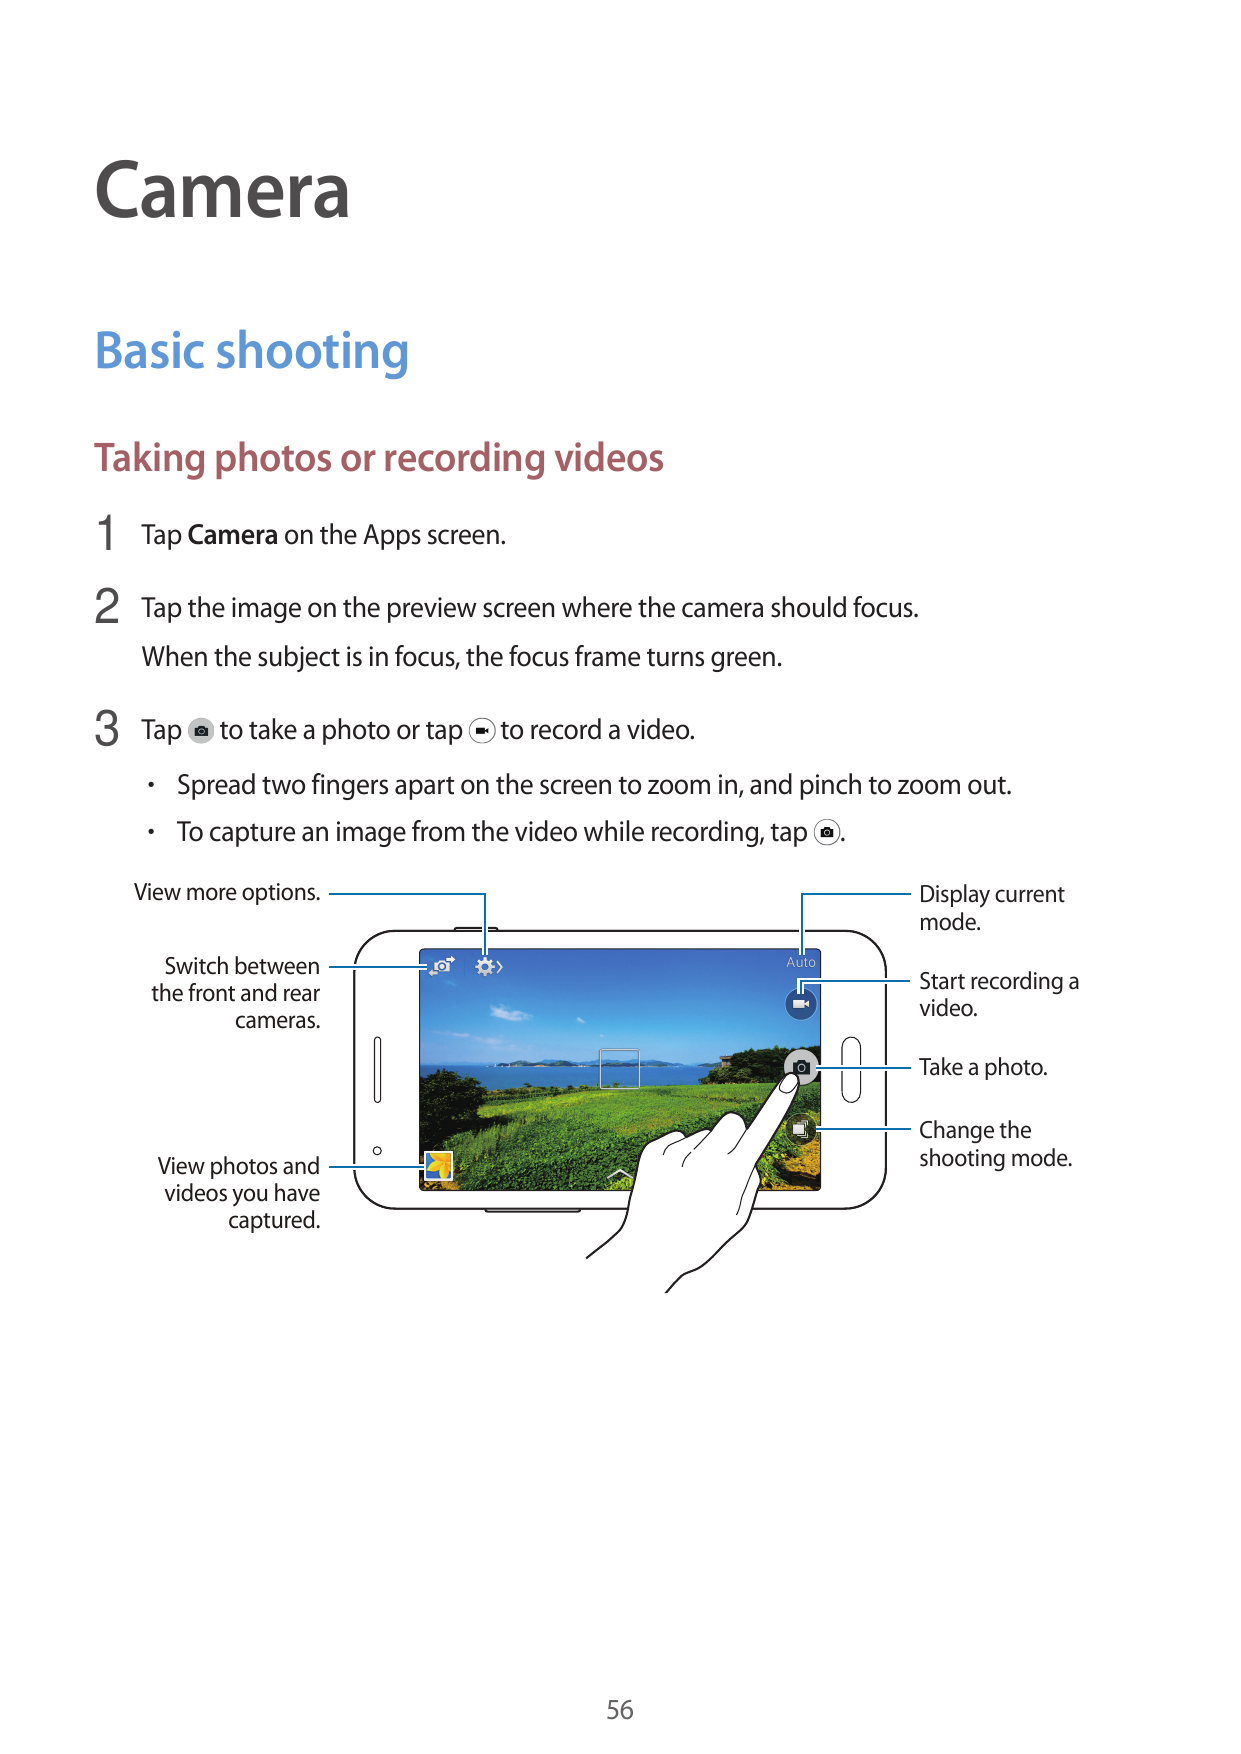 CameraBasic shootingTaking photos or recording videos1 Tap Camera on the Apps screen.2 Tap the image on the preview screen where